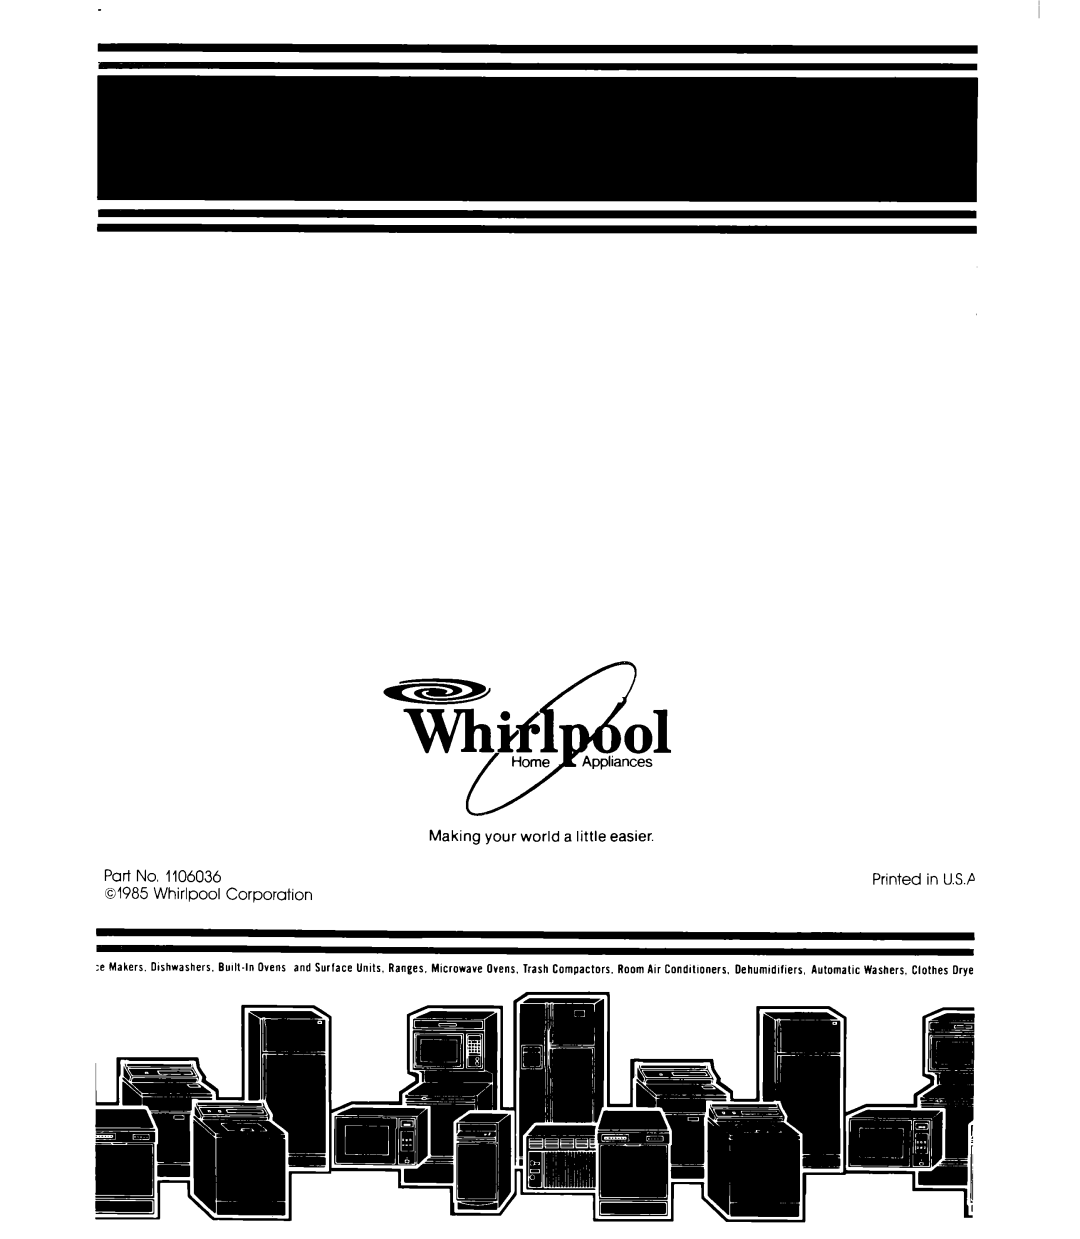 Whirlpool ED19HK manual Making your world a little easier, Whirlpool, Corporation 